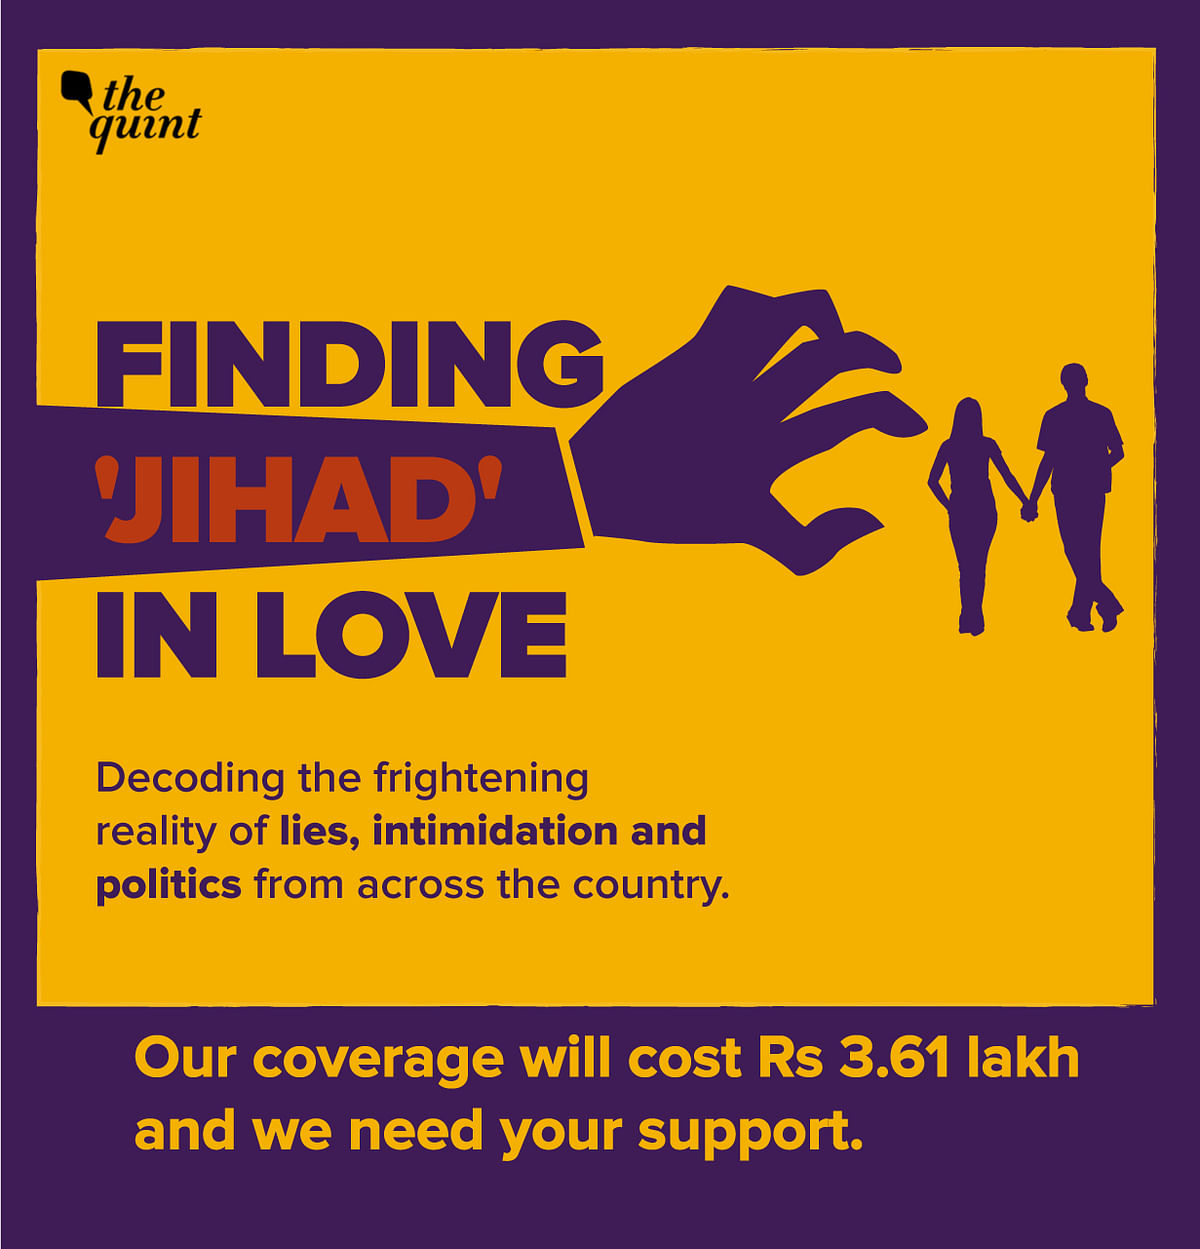 Help us reach our target of Rs 3.61 lakh – the amount we need to carry out this special project.